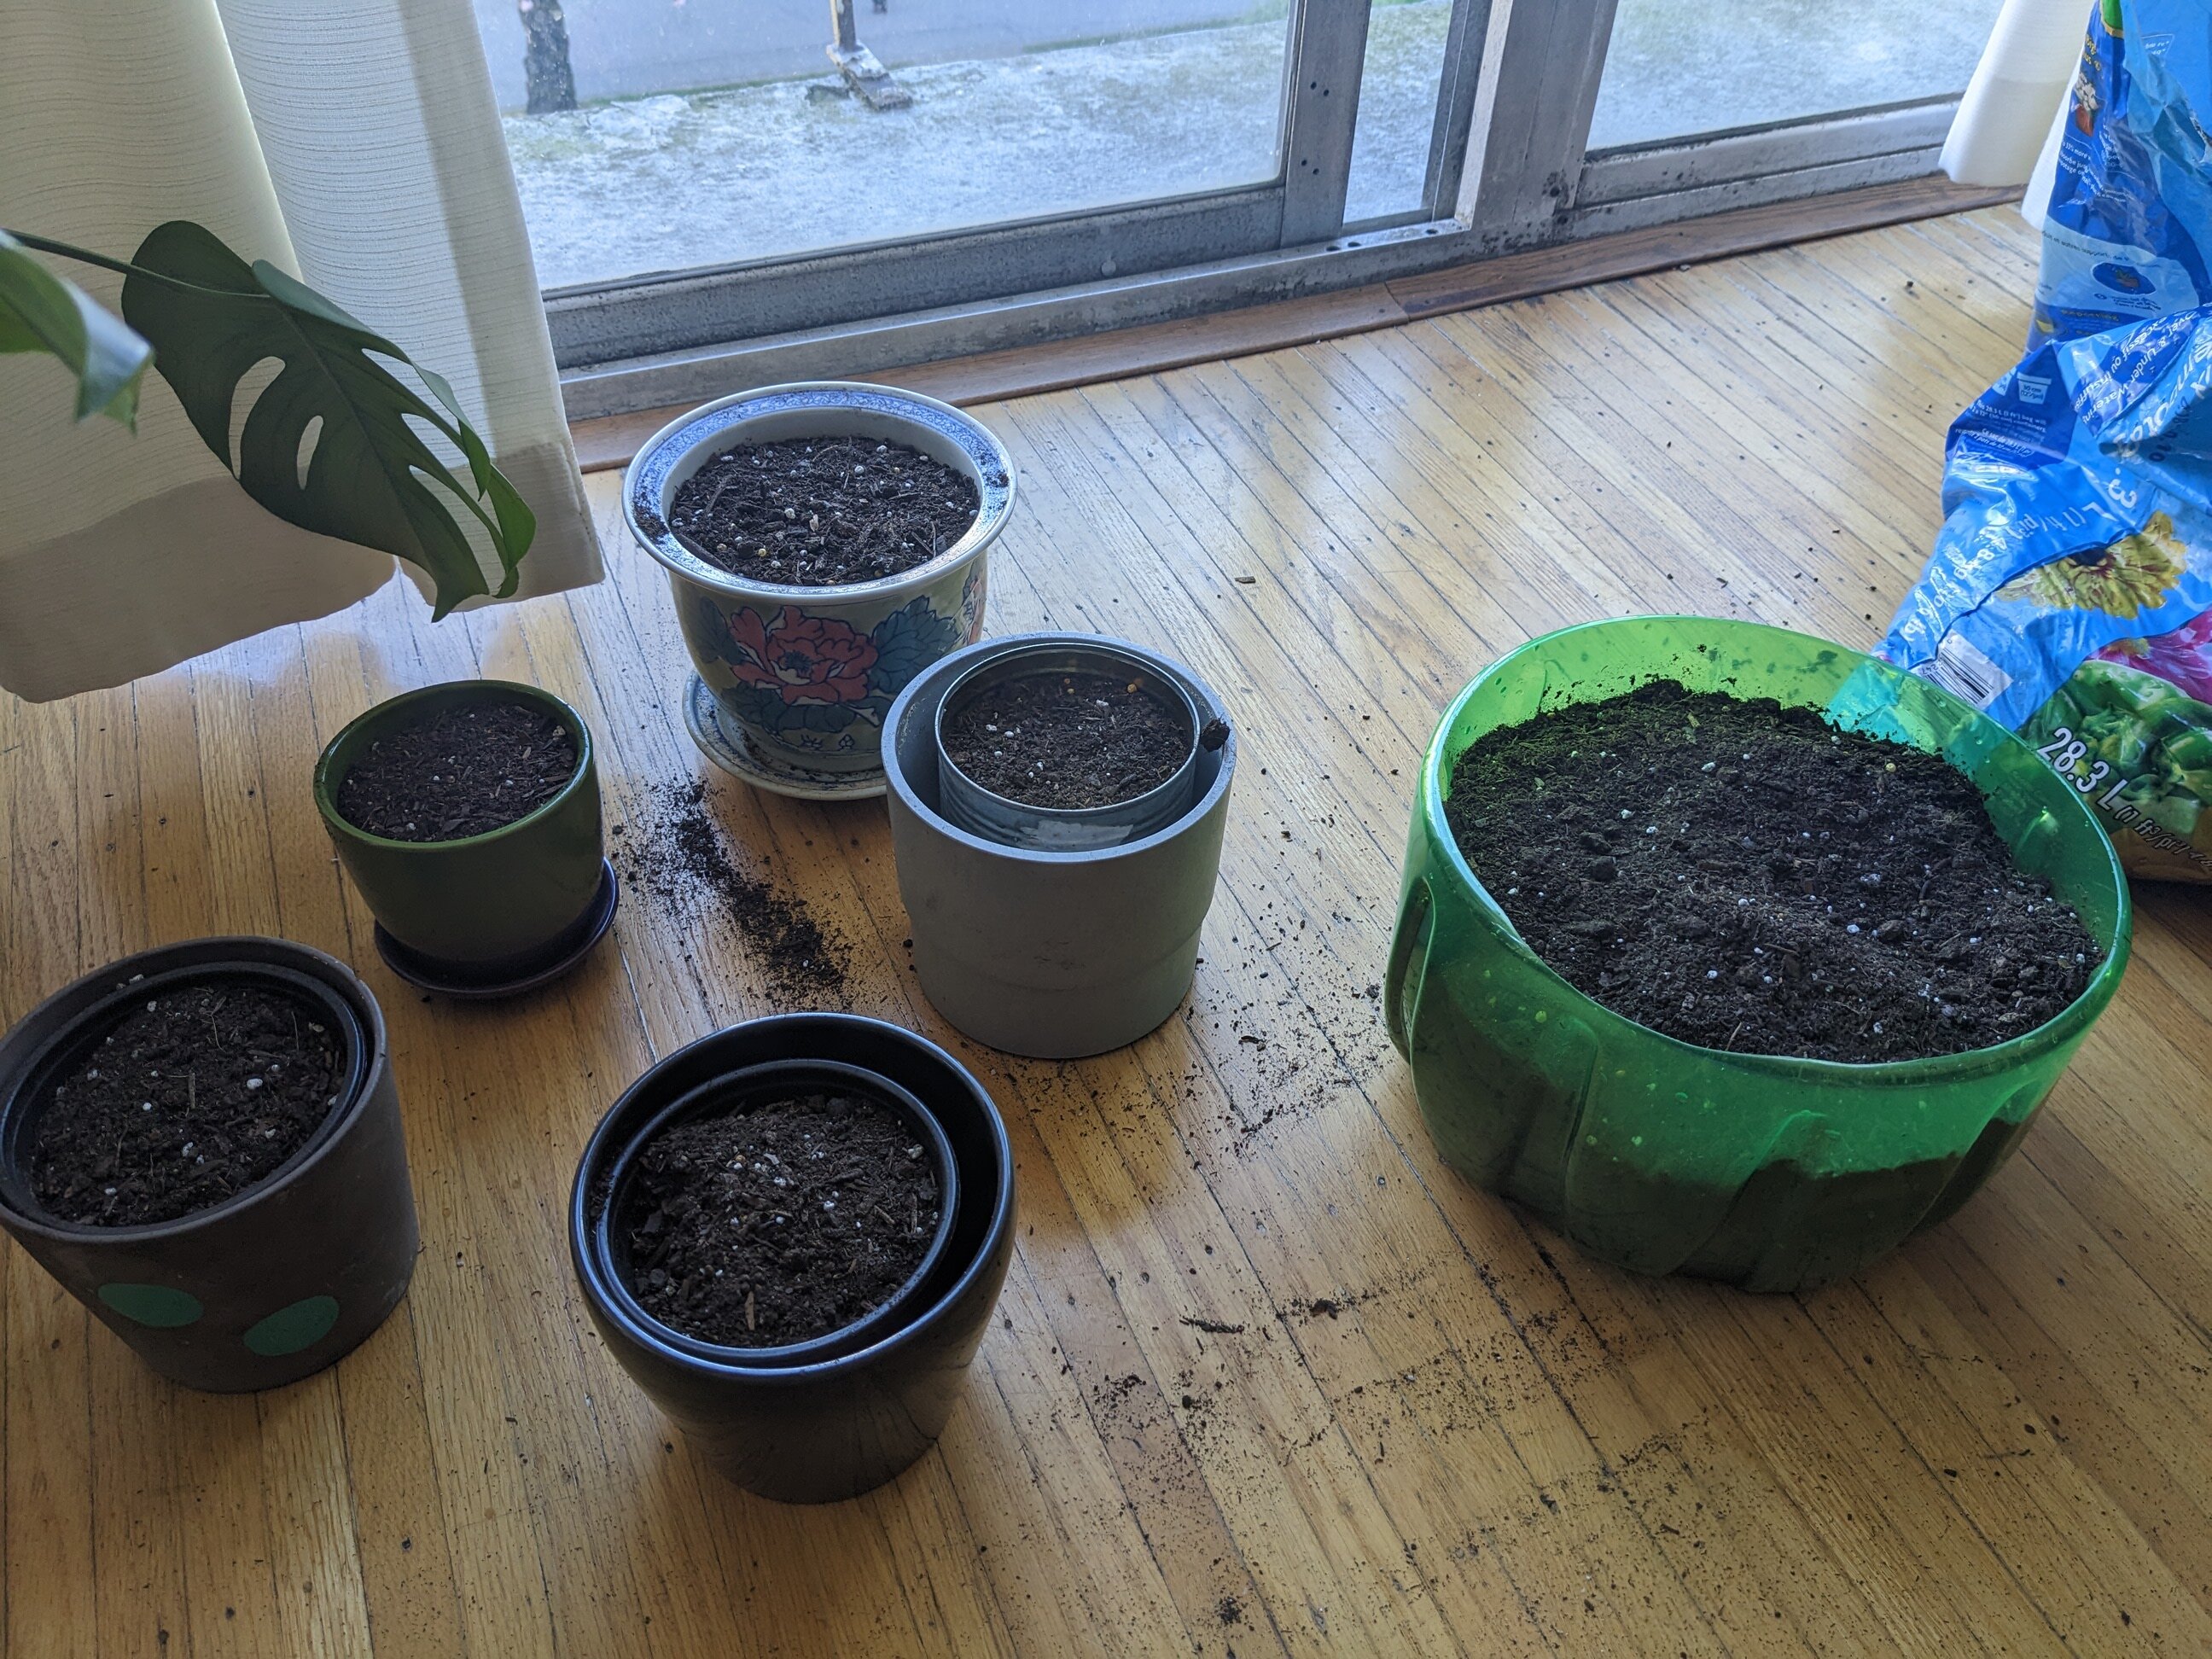 Several plant pots of varying sizes and materials, each full of soil.